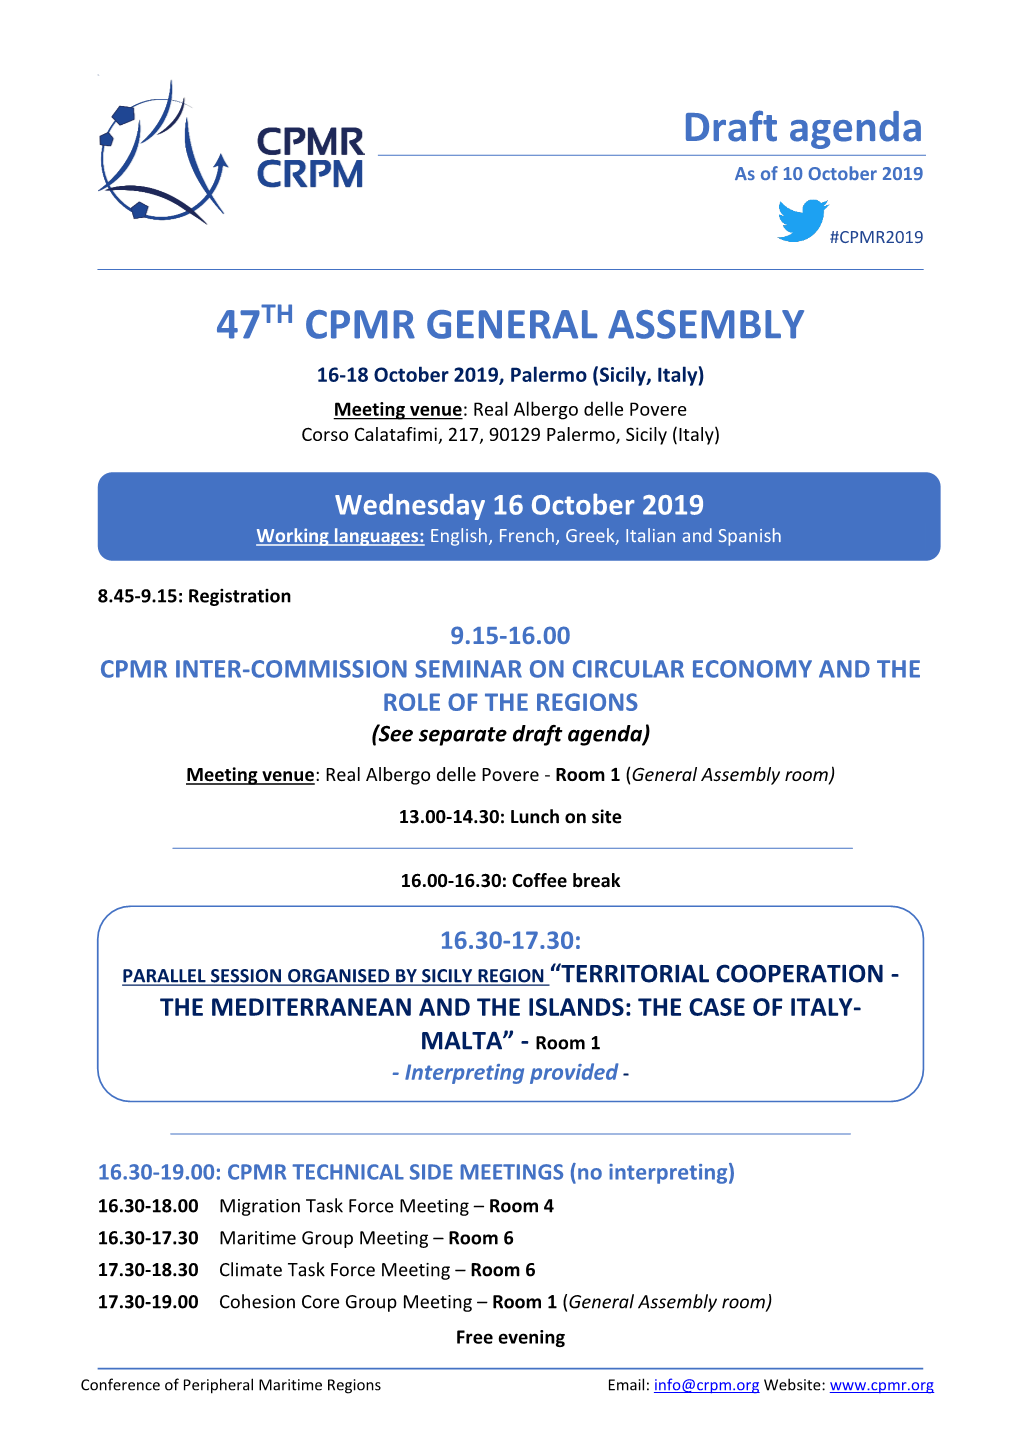 Draft Agenda 47TH CPMR GENERAL ASSEMBLY